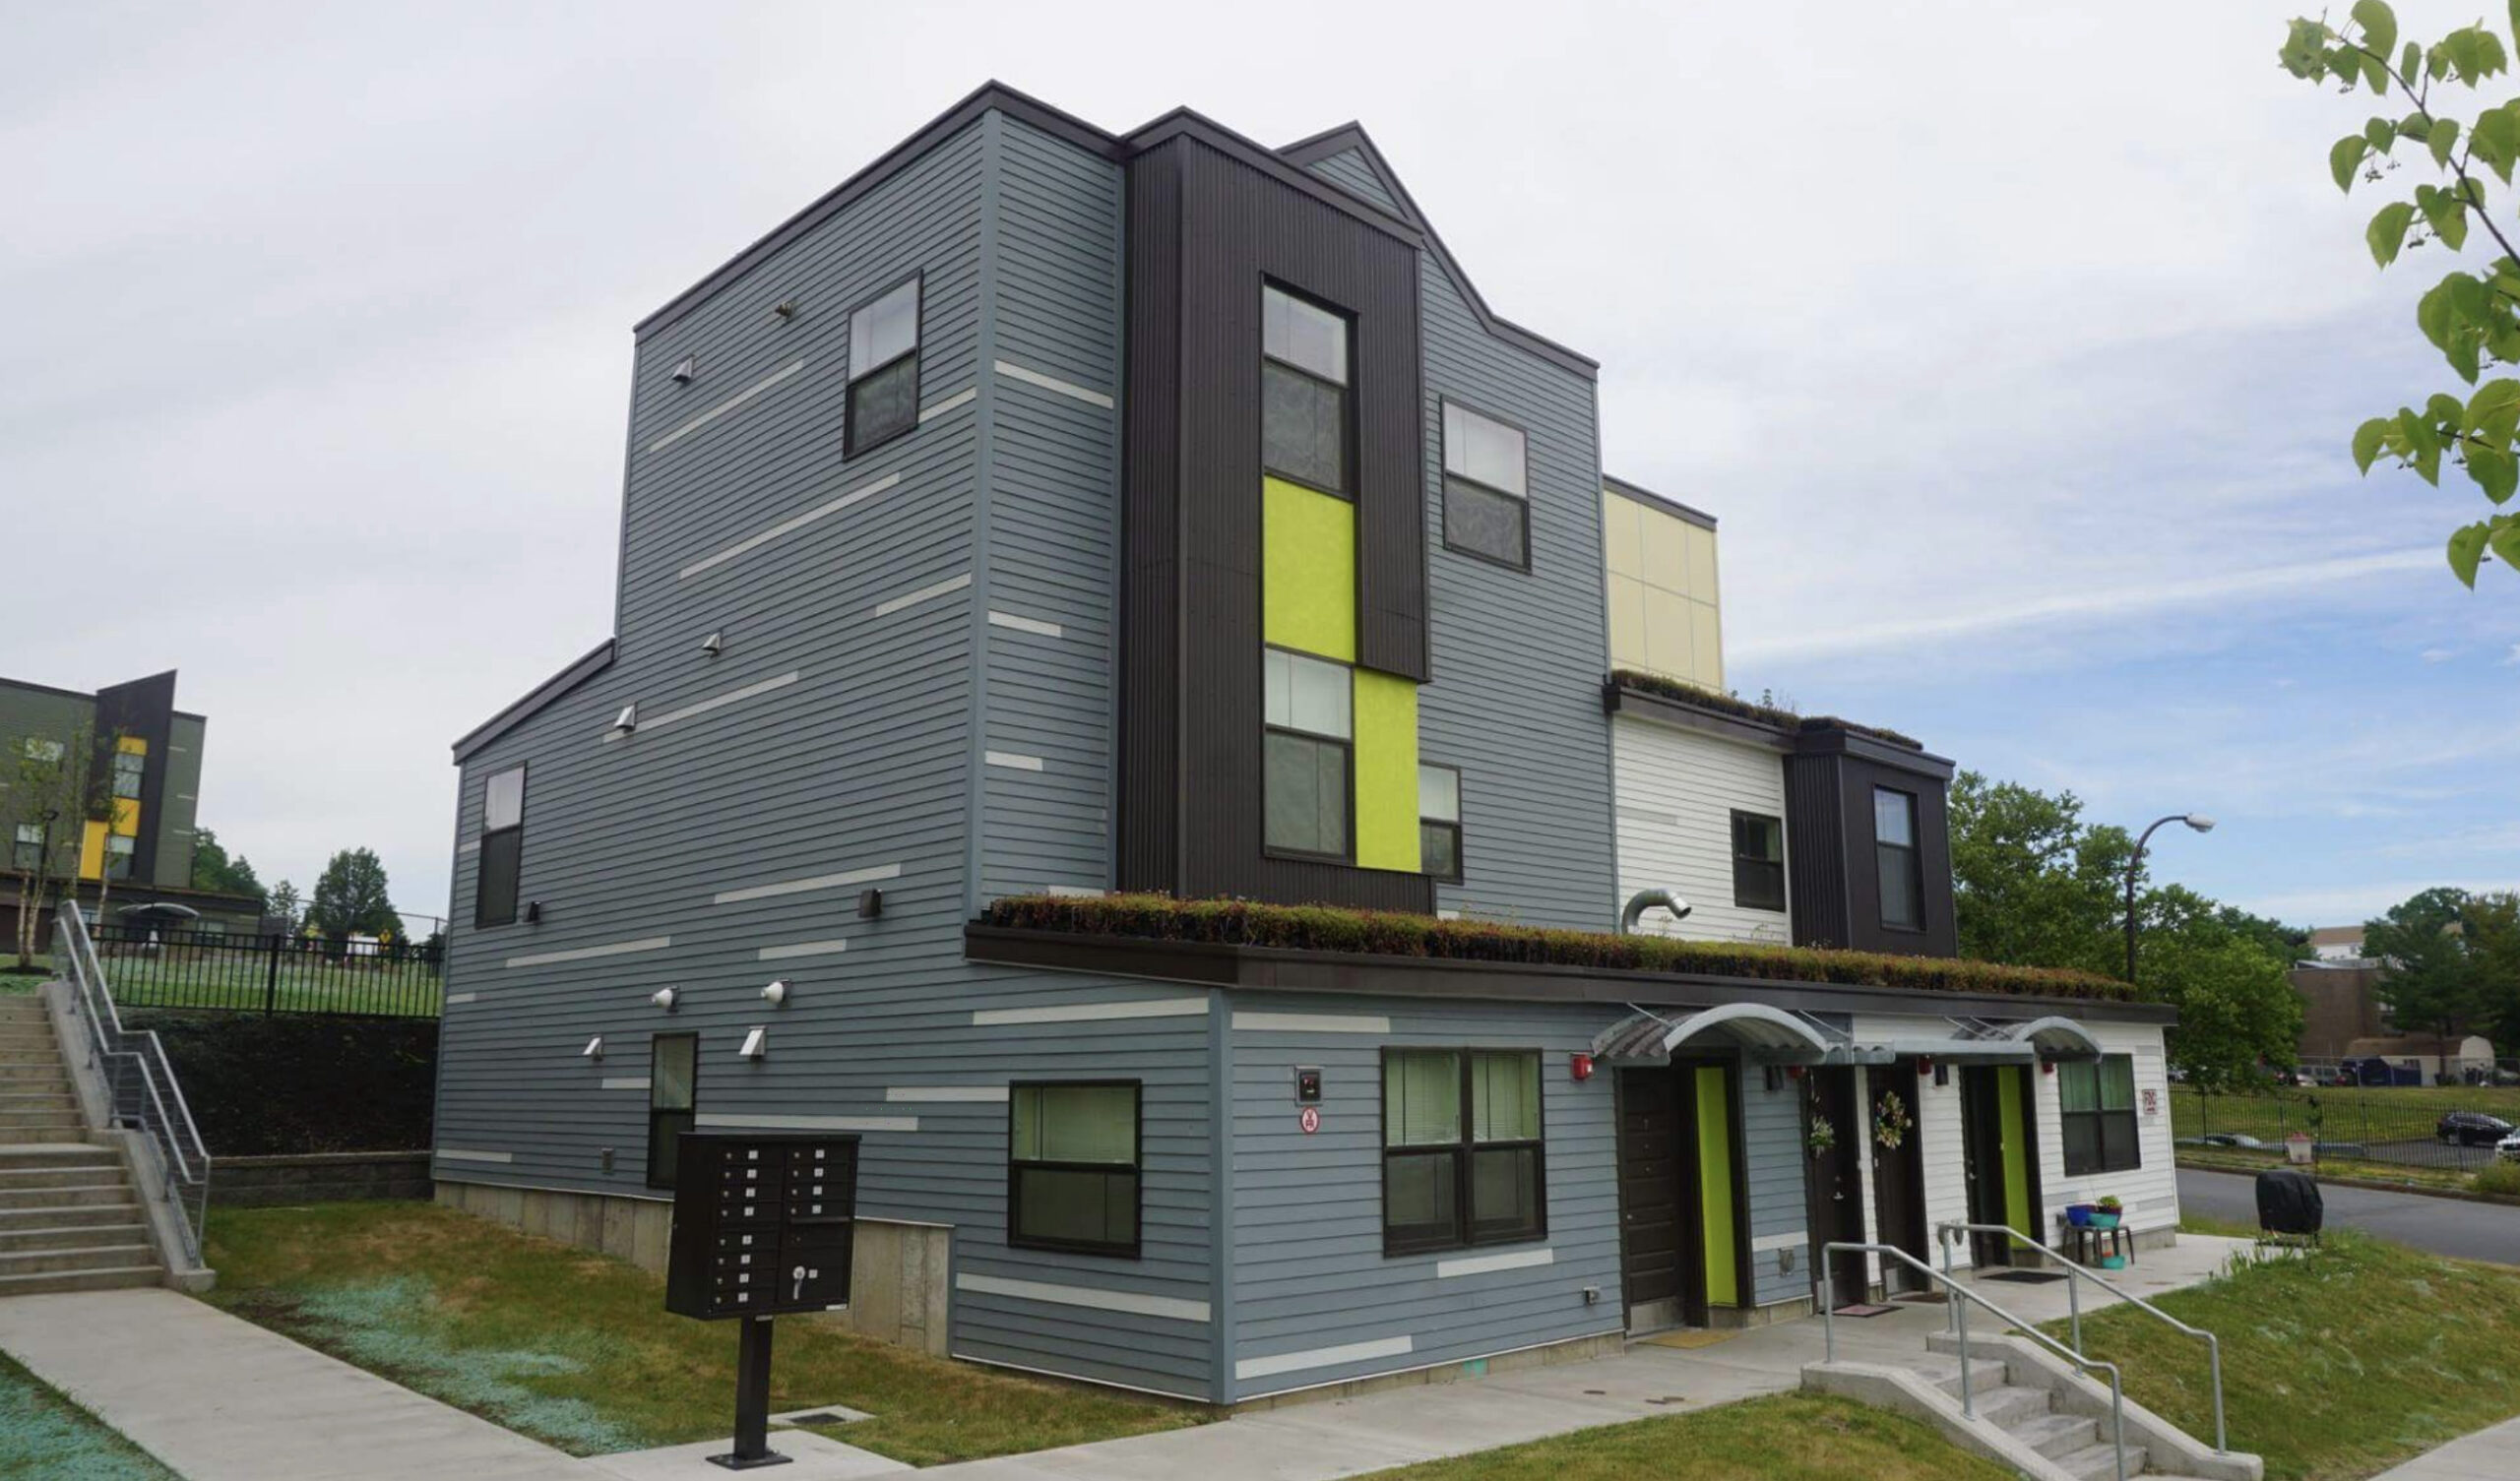 How low income housing can uplift a community